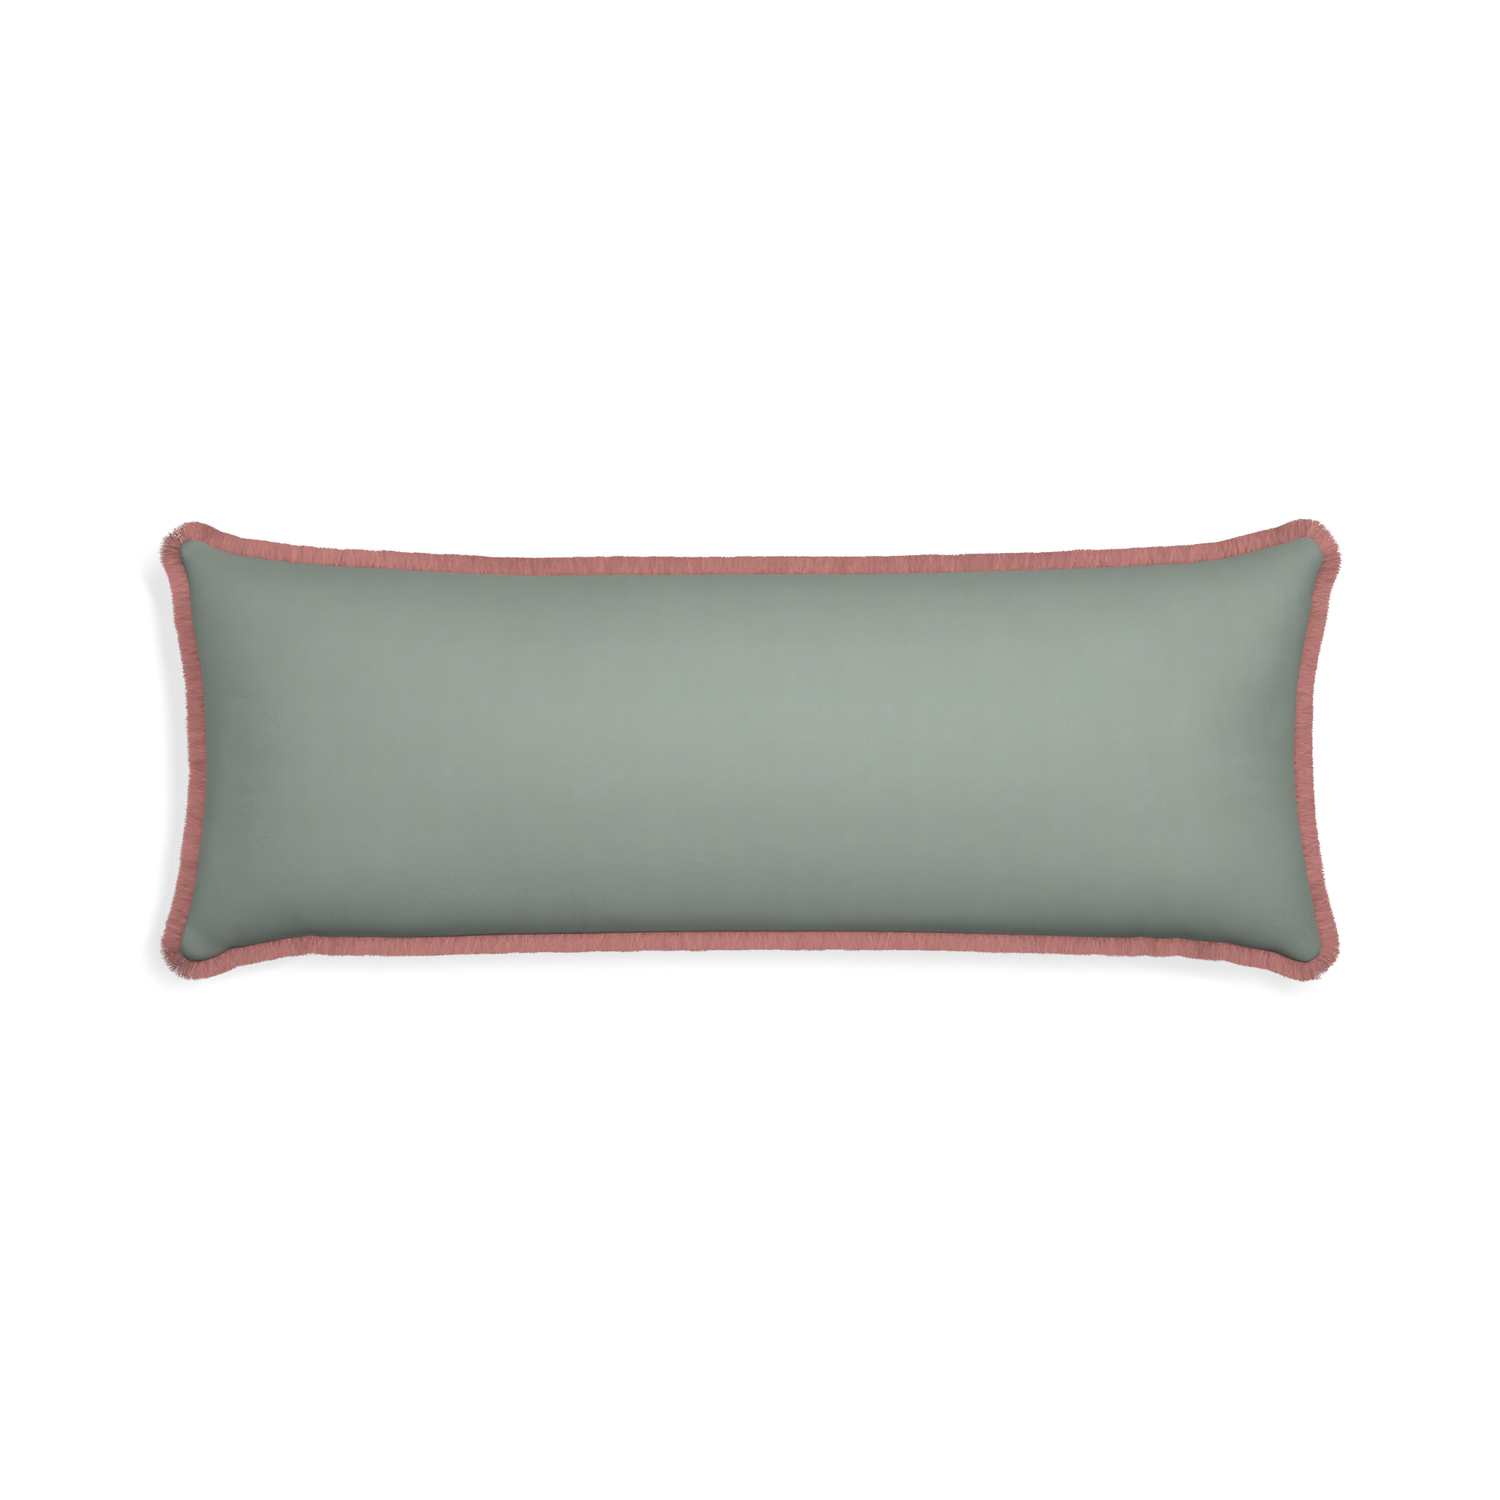 Xl-lumbar sage custom pillow with d fringe on white background